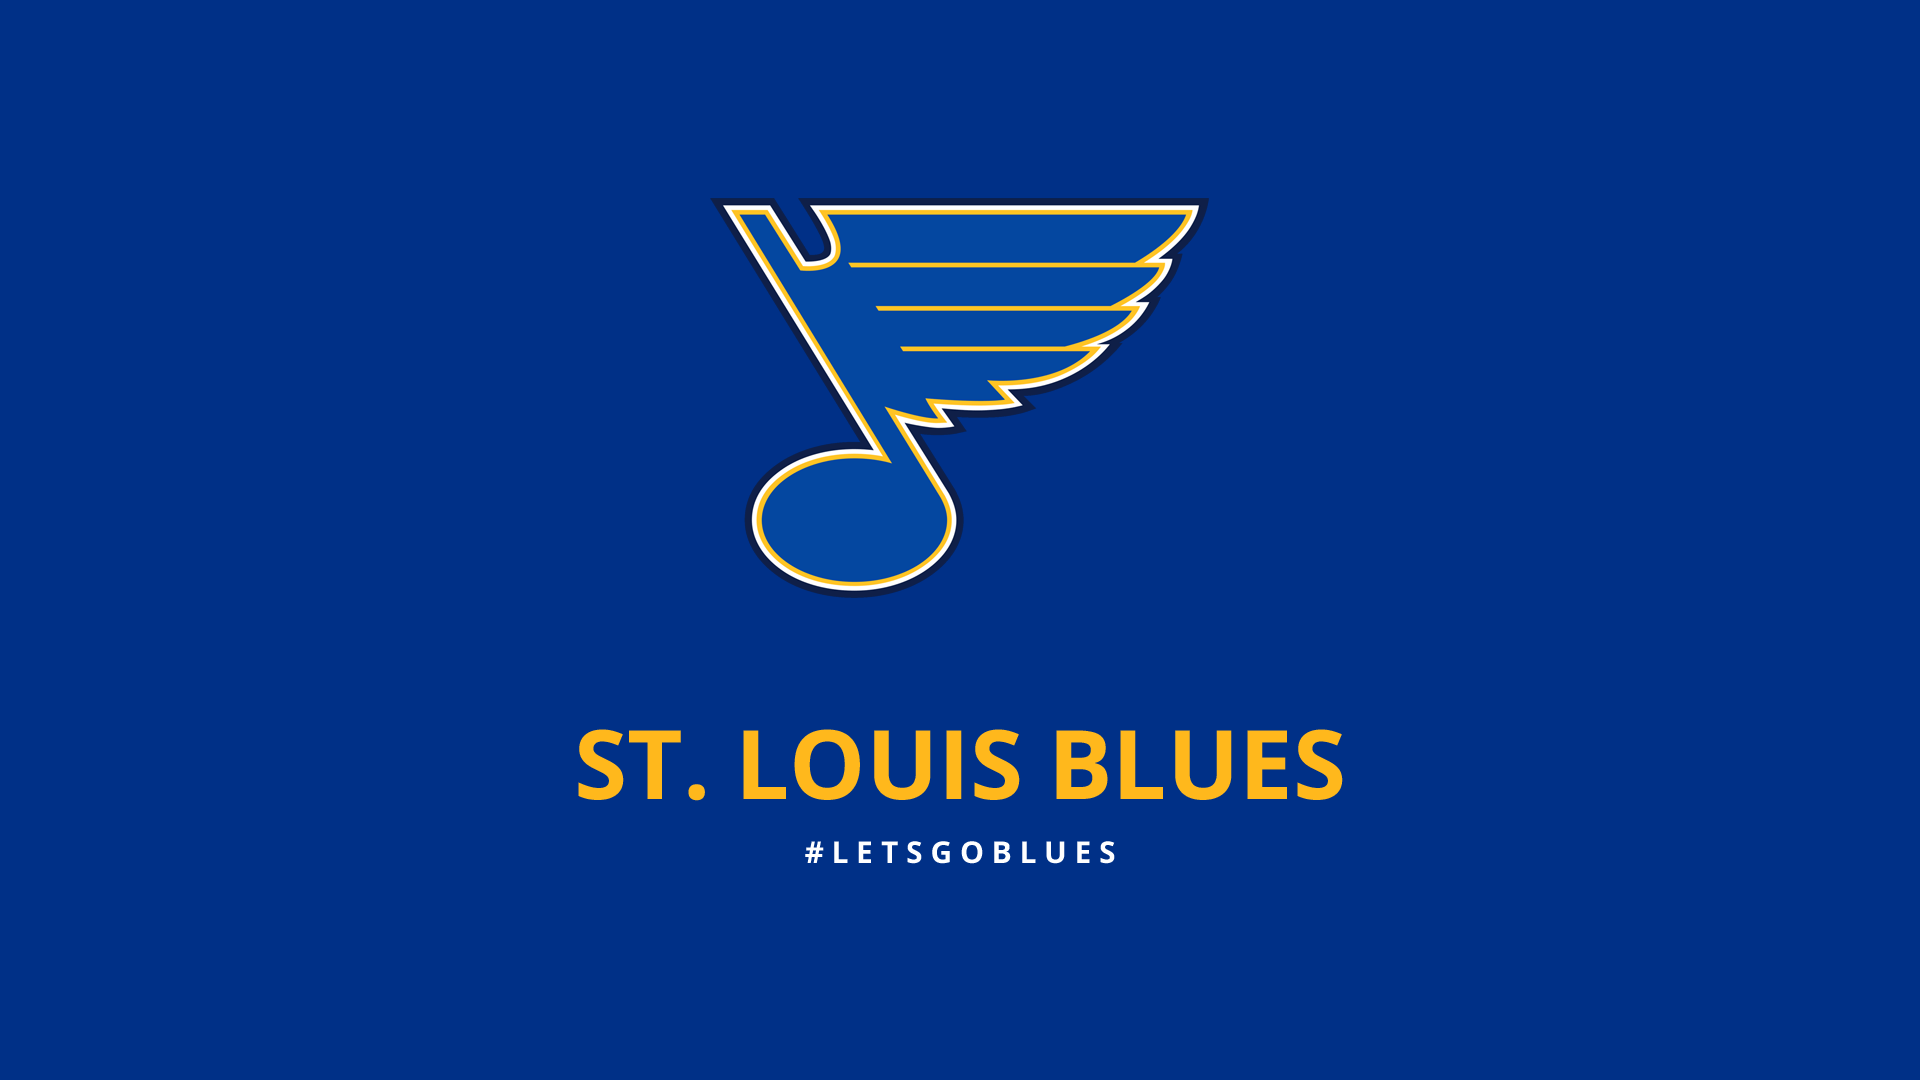 St. Louis Blues Hockey Logo - Get Your Tickets Today: St. Louis Blues Hockey on December 9